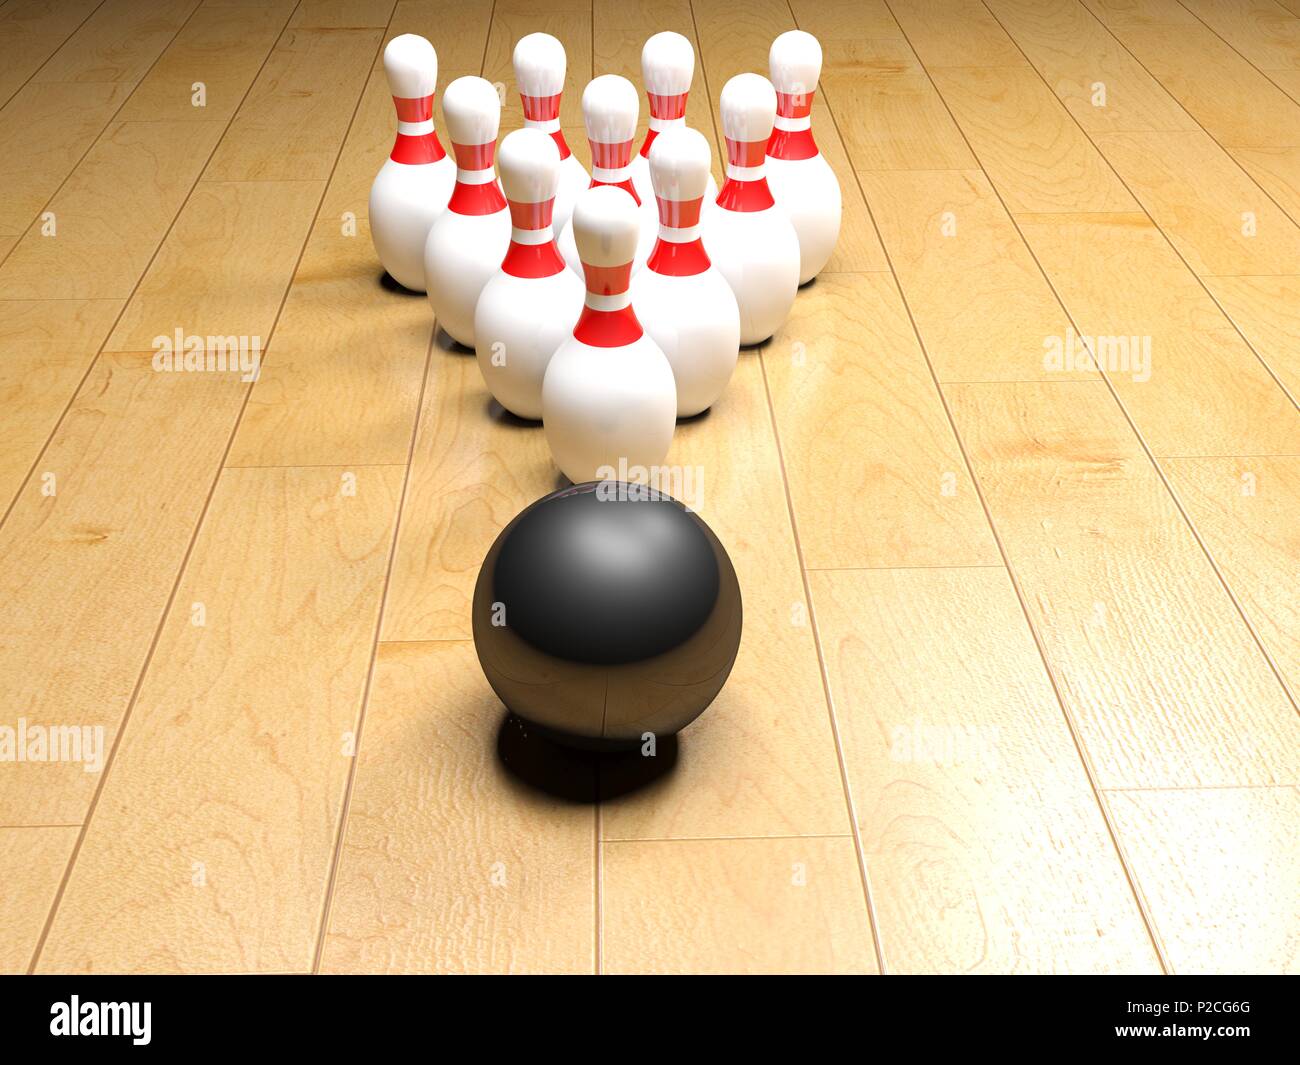 Bowling bowl and pins on wooden surface - 3D rendering Stock Photo